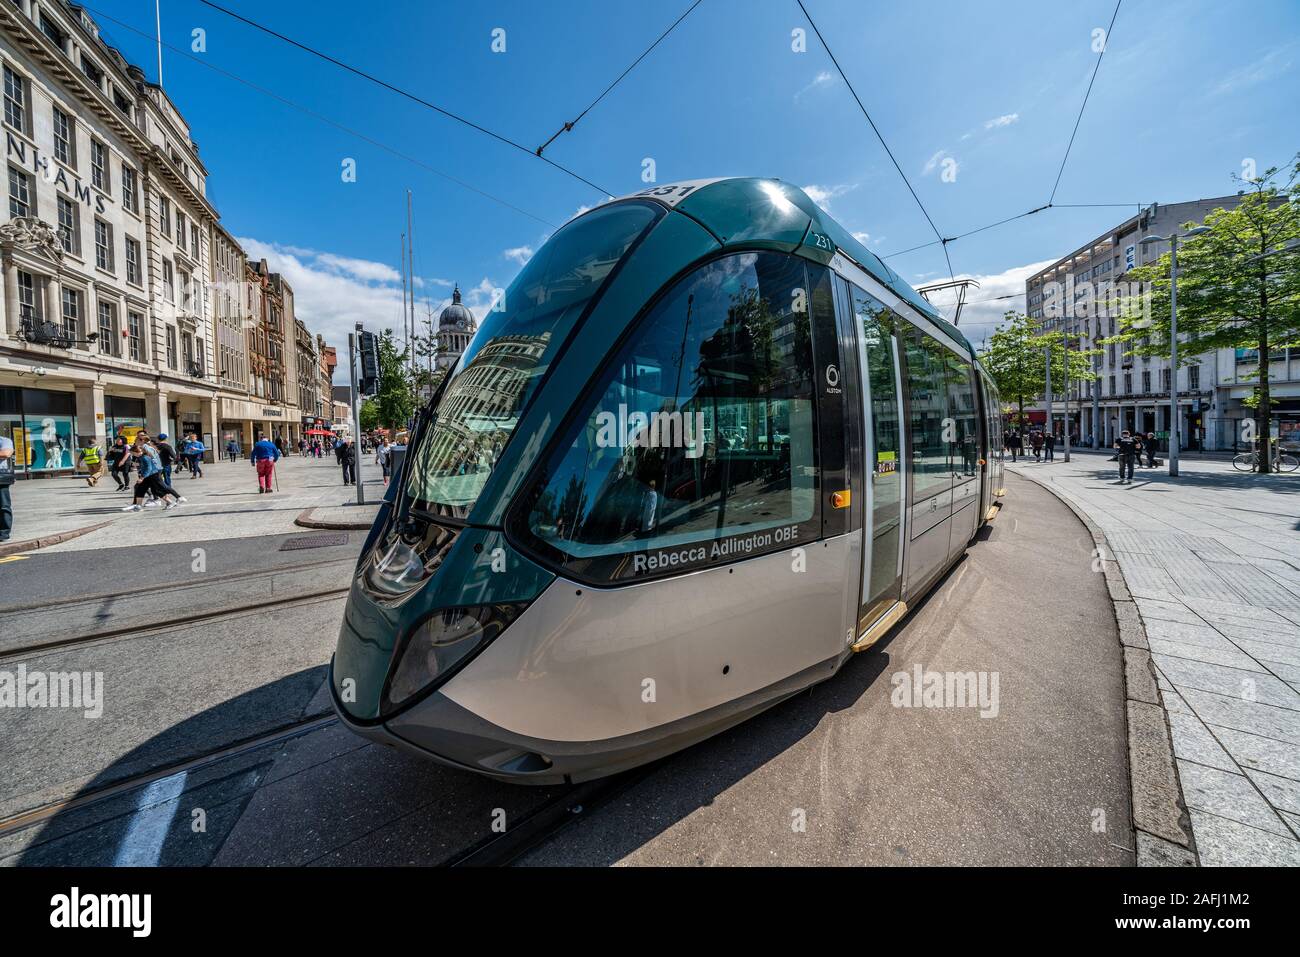 NOTTINGHAM, UNITED KINGDOM - AUGUST 15:This is the tram on a tramway line outside the Old Market Square on August 15, 2019 in Nottingham Stock Photo